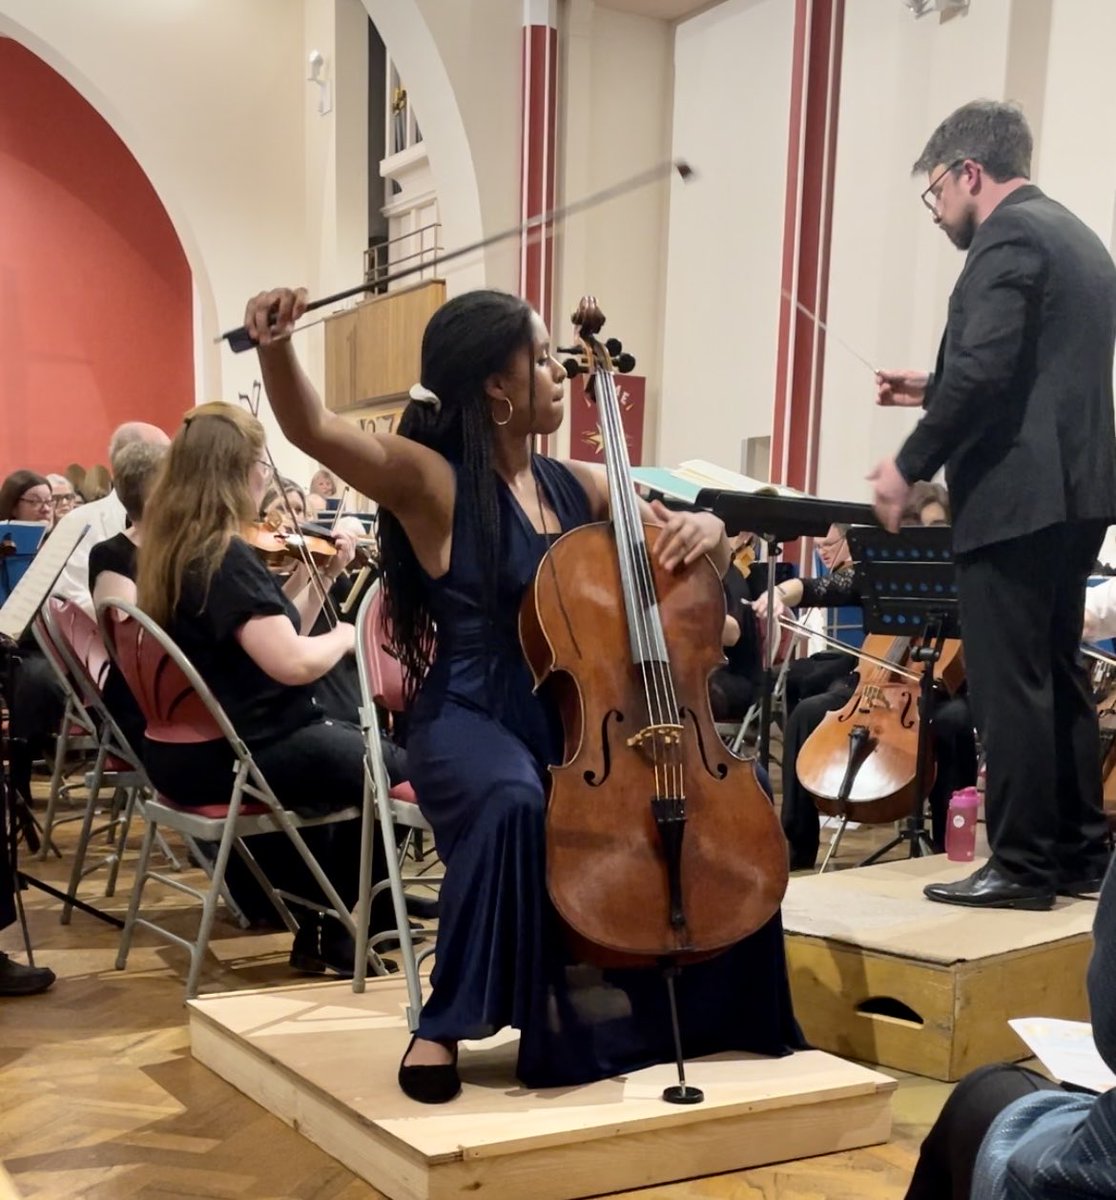 Mariatu (14) plays her first concerto (Saint-Saens) 🎉with family @ShekuKM and cello teacher Ben Davies @RoyalAcadMusic to watch! Memories of every sibling performing their very first concerto with Djanogly Community Orchestra in Nottingham- tradition complete 🎻🎶